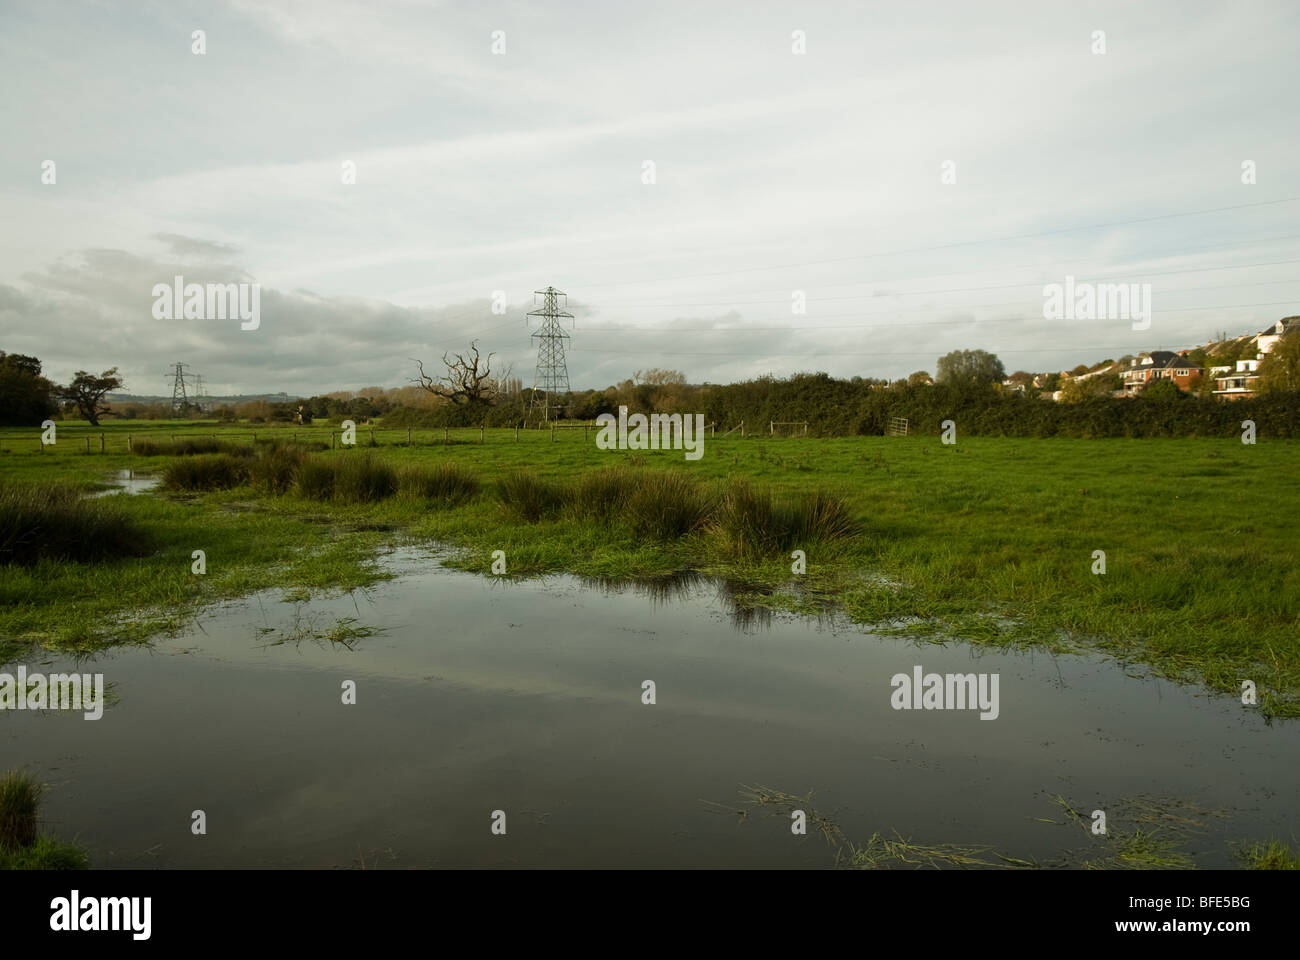 flooded part of field on a light cloudy day, Exeter, Devon, UK Stock Photo